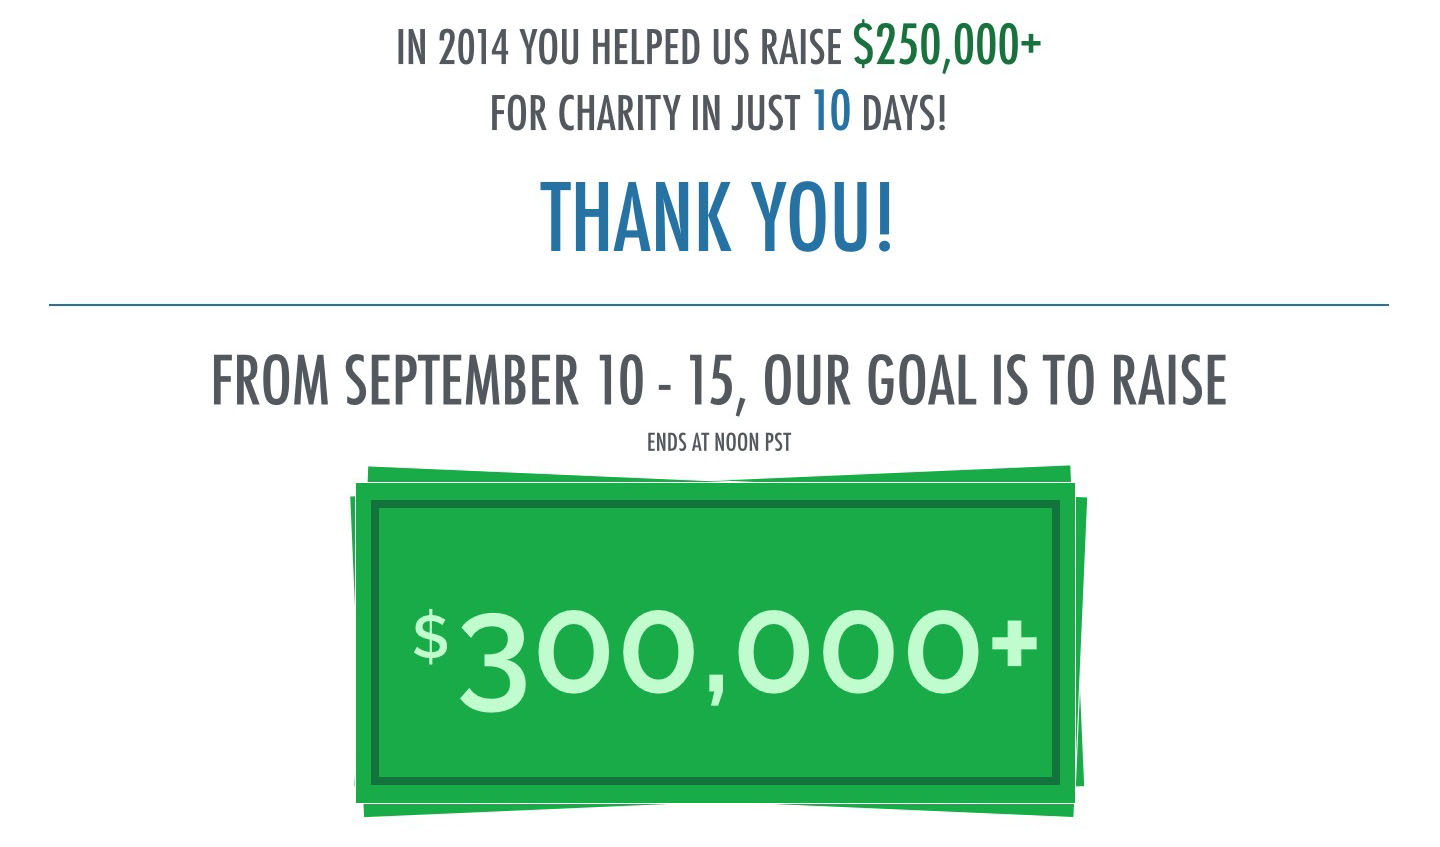 In 2014 you helped us raise $250,000+ for Charity in just 10 days! Thank you! From September 10-15, our goal is to raise $300,000+